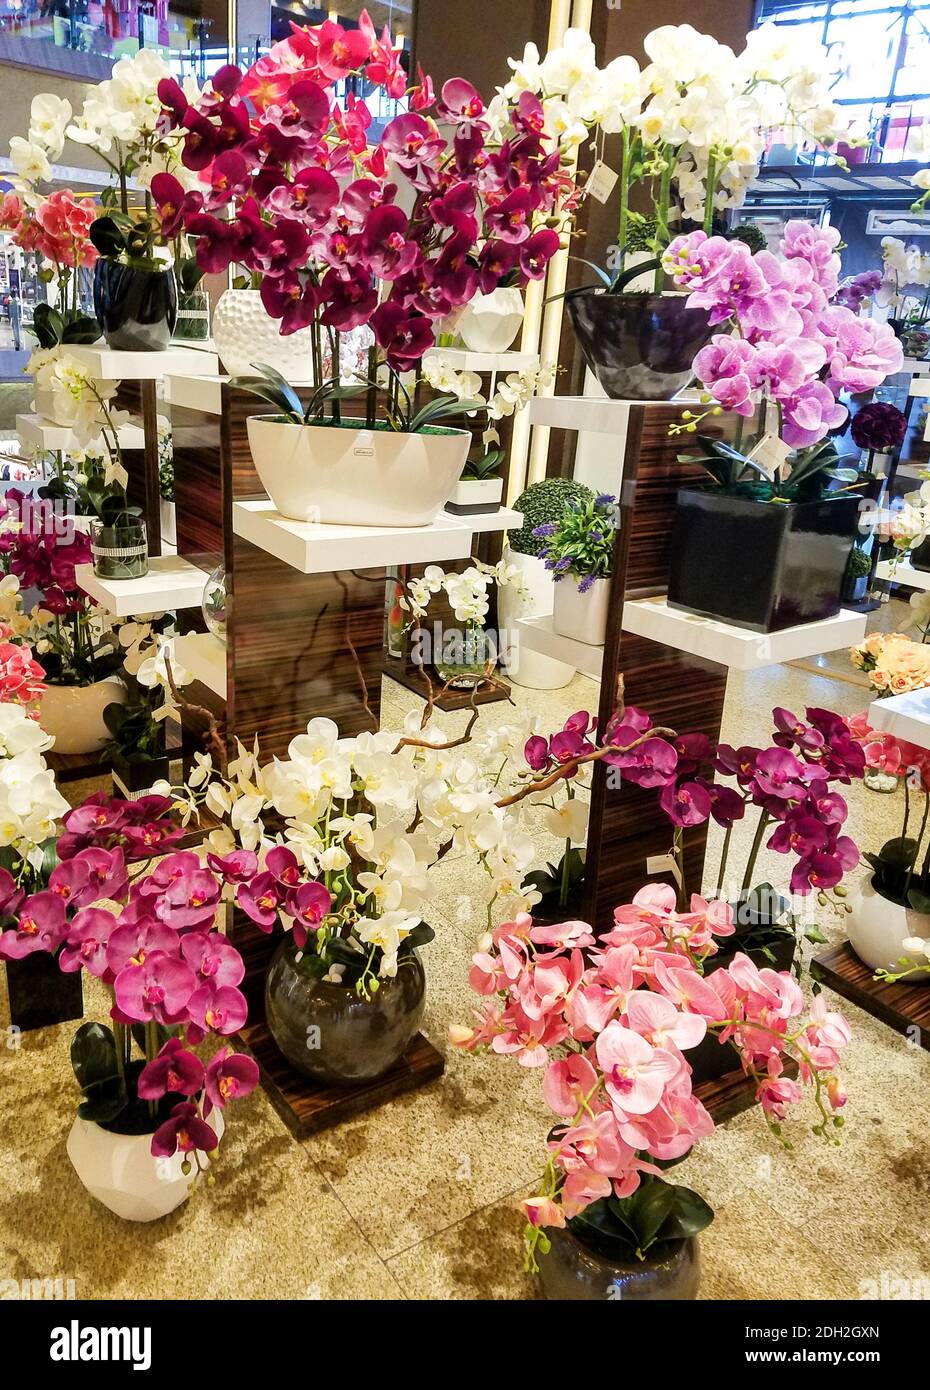 Display of multicolored orchid arrangements in pink, violet, red and white. Stock Photo